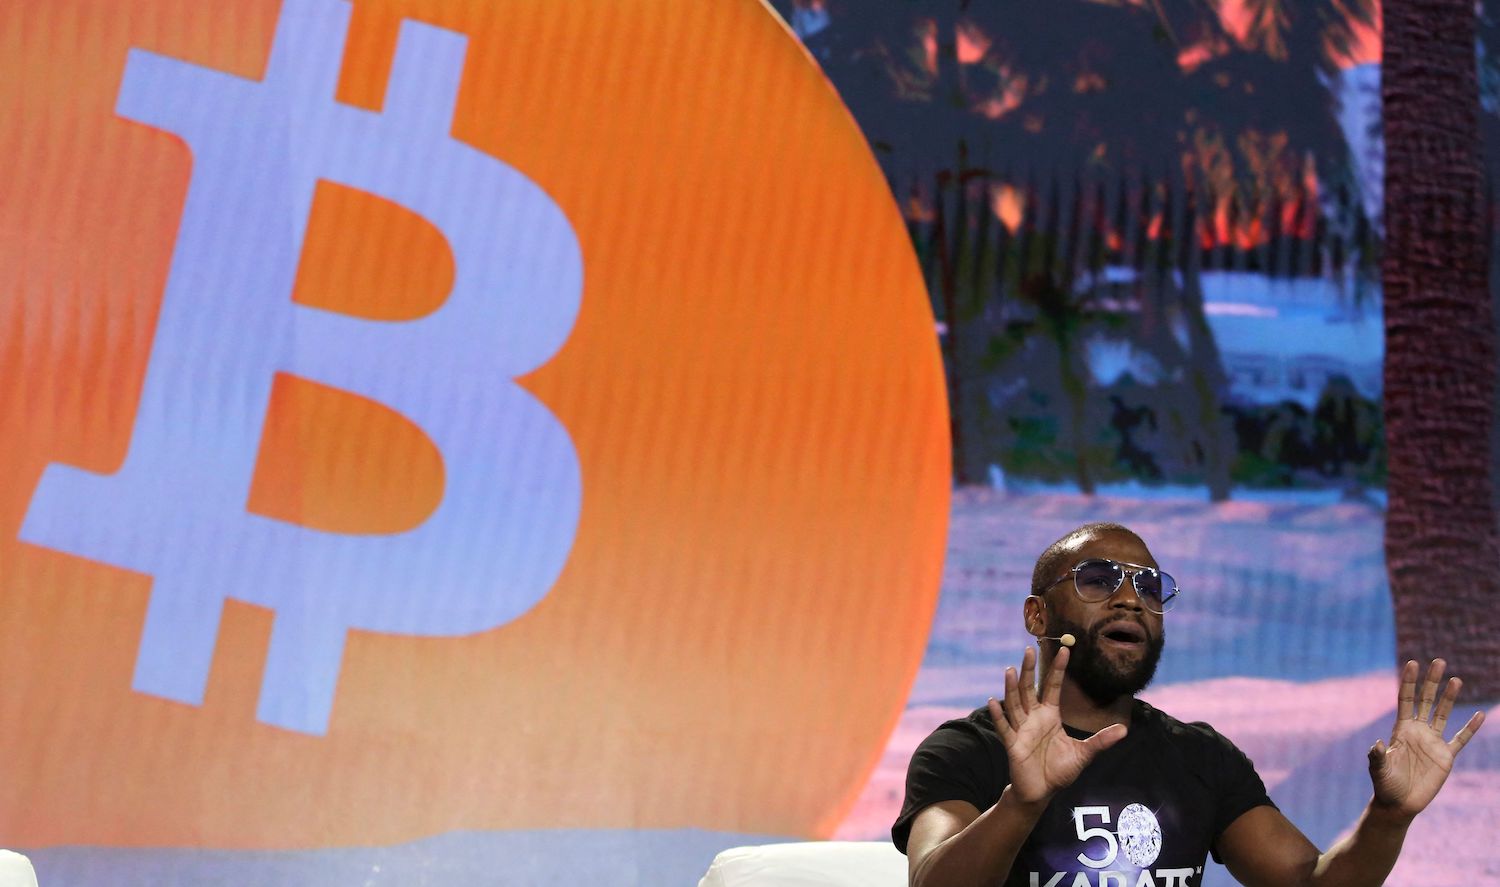 Former world welterweight king Floyd Mayweather speaks on stage during the crypto-currency conference Bitcoin 2021 Convention at the Mana Convention Center in Miami, Florida, on June 4, 2021. (Photo by Marco BELLO / AFP) (Photo by MARCO BELLO/AFP via Getty Images)